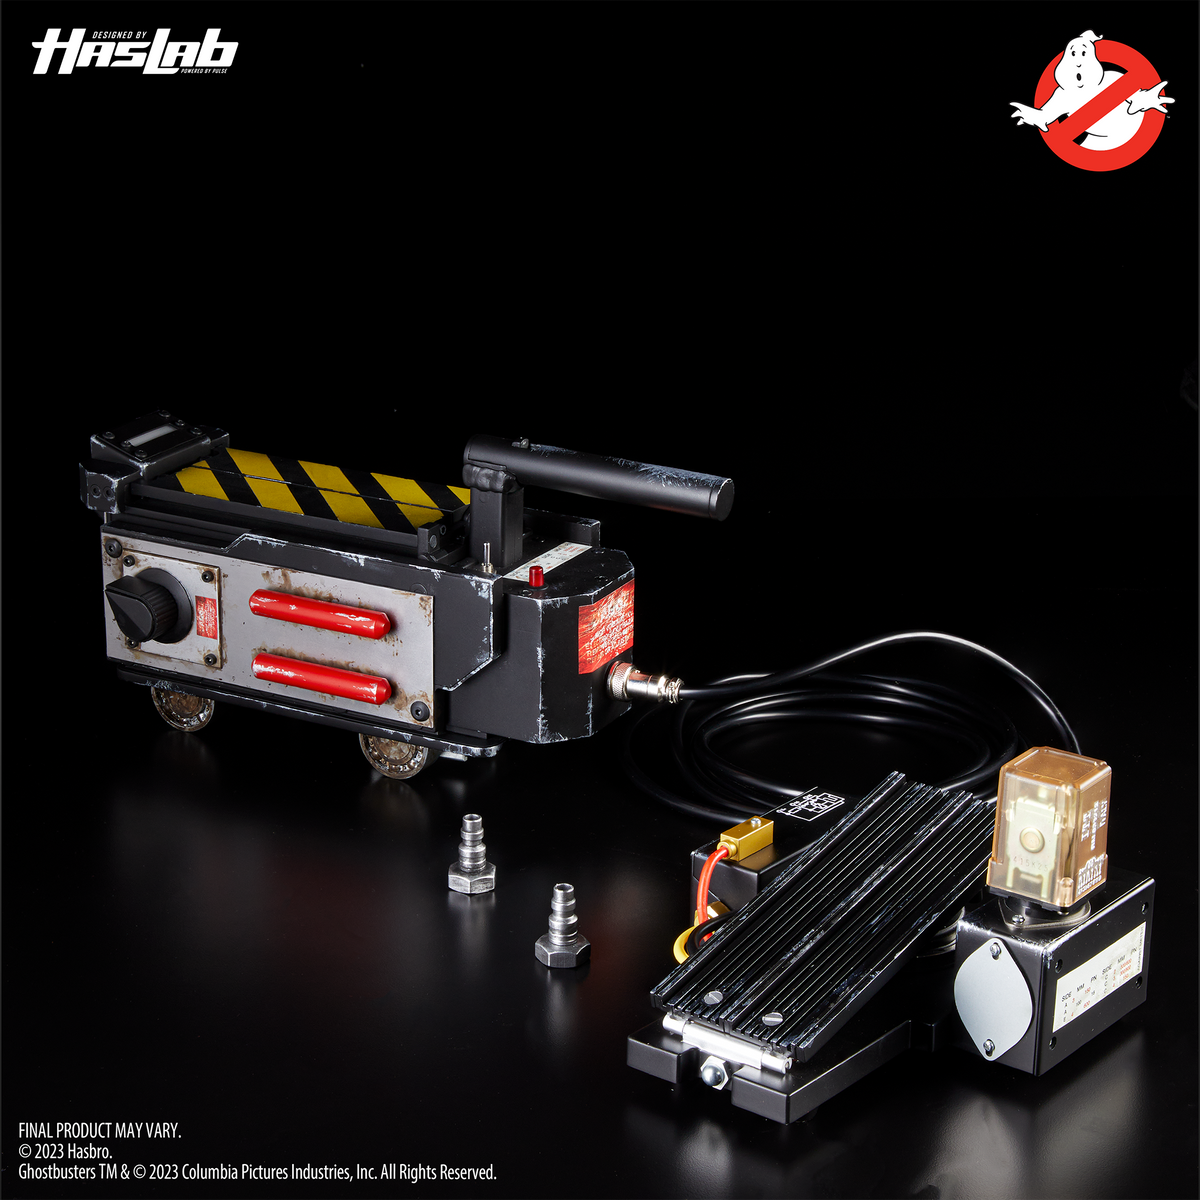 Ghostbusters Plasma Series HasLab Two in the Box! Ghost Trap and